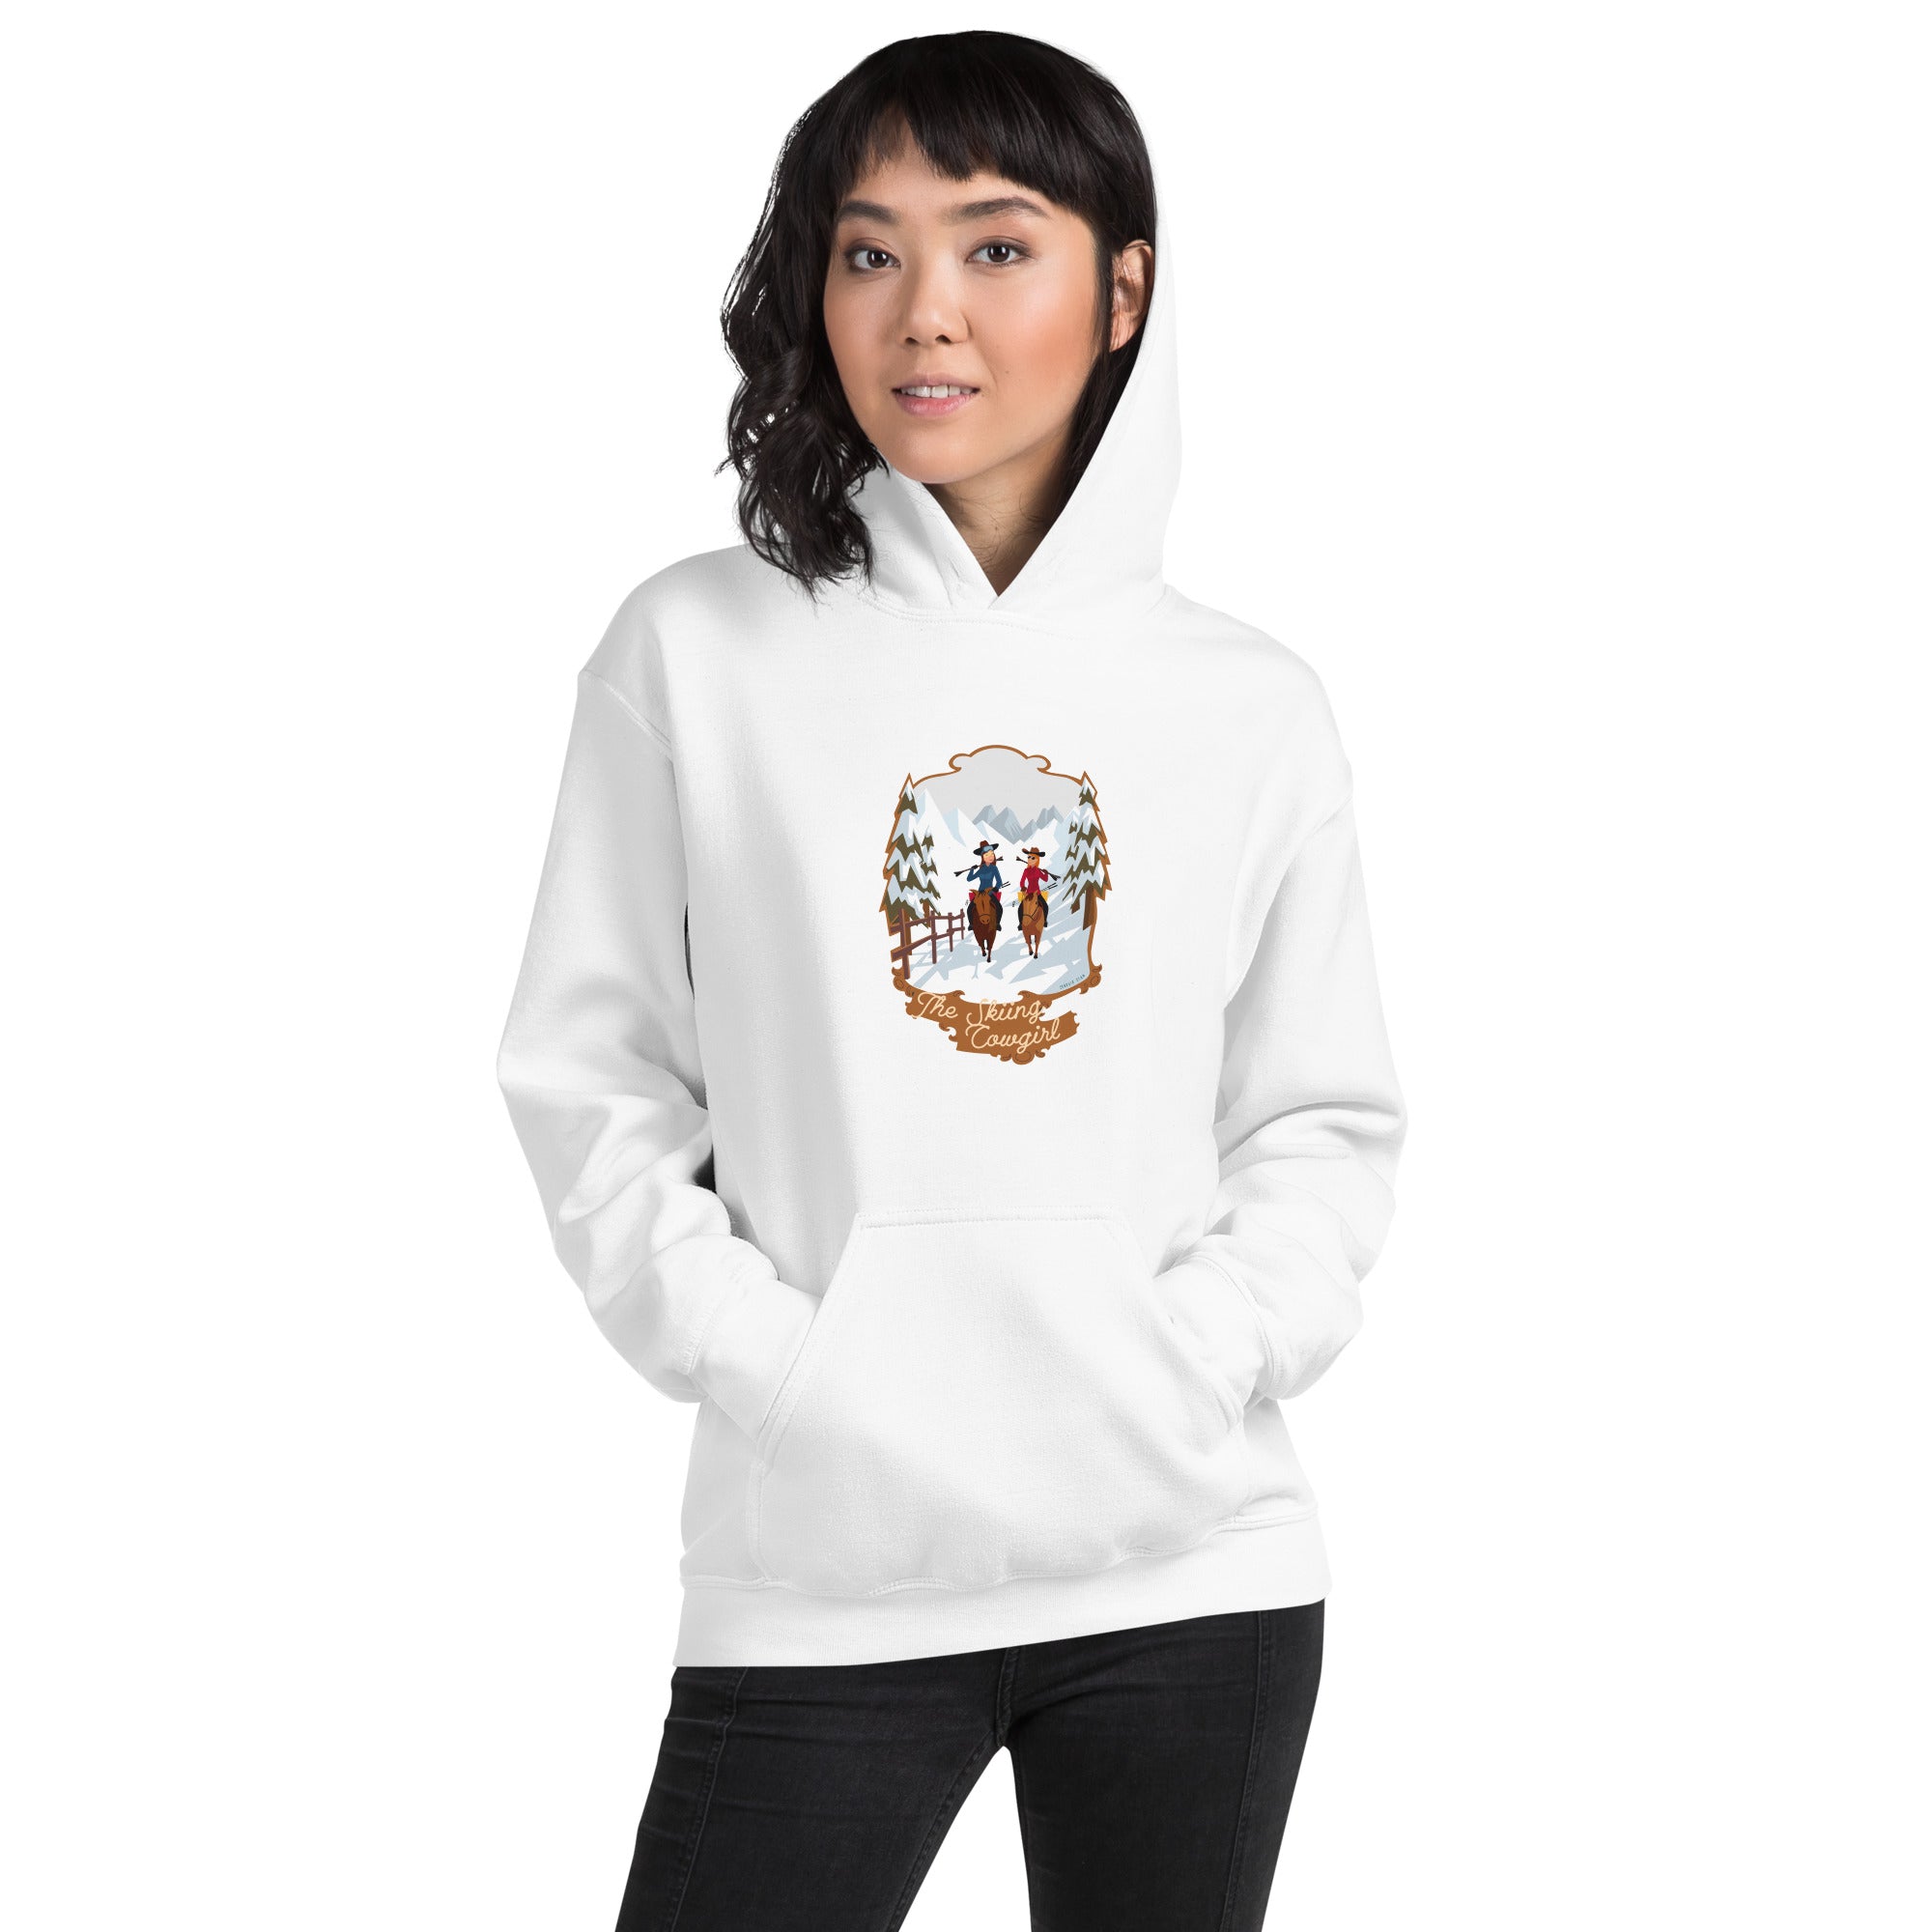 Unisex Hoodie The Skiing Cowgirl on light colors